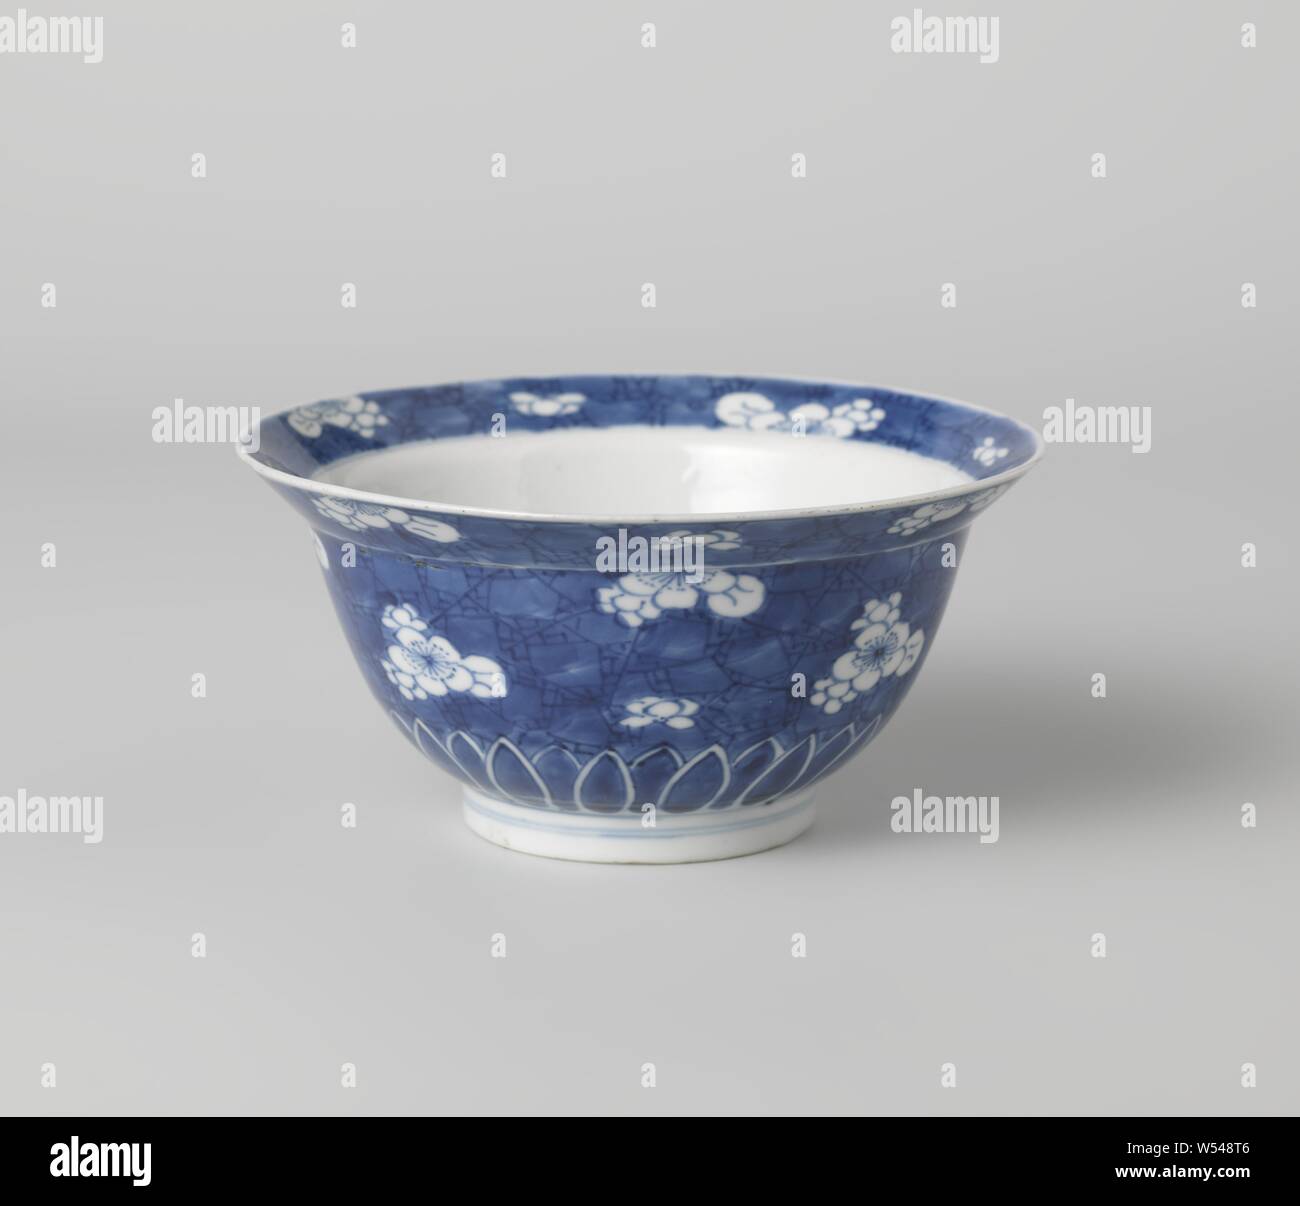 Bowl (folding hat) with plumblossom on 'crackled ice', Bowl (folding hat) of porcelain, painted in underglaze blue. On the outside wall, the bottom and inside and outside edge 'crackled ice' with recessed plum blossoms. The underside of the outer wall with a band of pointed leaf motifs. Marked on the bottom with an incense burner in a double circle. Blue White., anonymous, China, c. 1680 - c. 1720, Qing-dynasty (1644-1912) / Kangxi-period (1662-1722), porcelain (material), glaze, cobalt (mineral), painting, h 7.6 cm d 15.5 cm d 6.8 cm Stock Photo